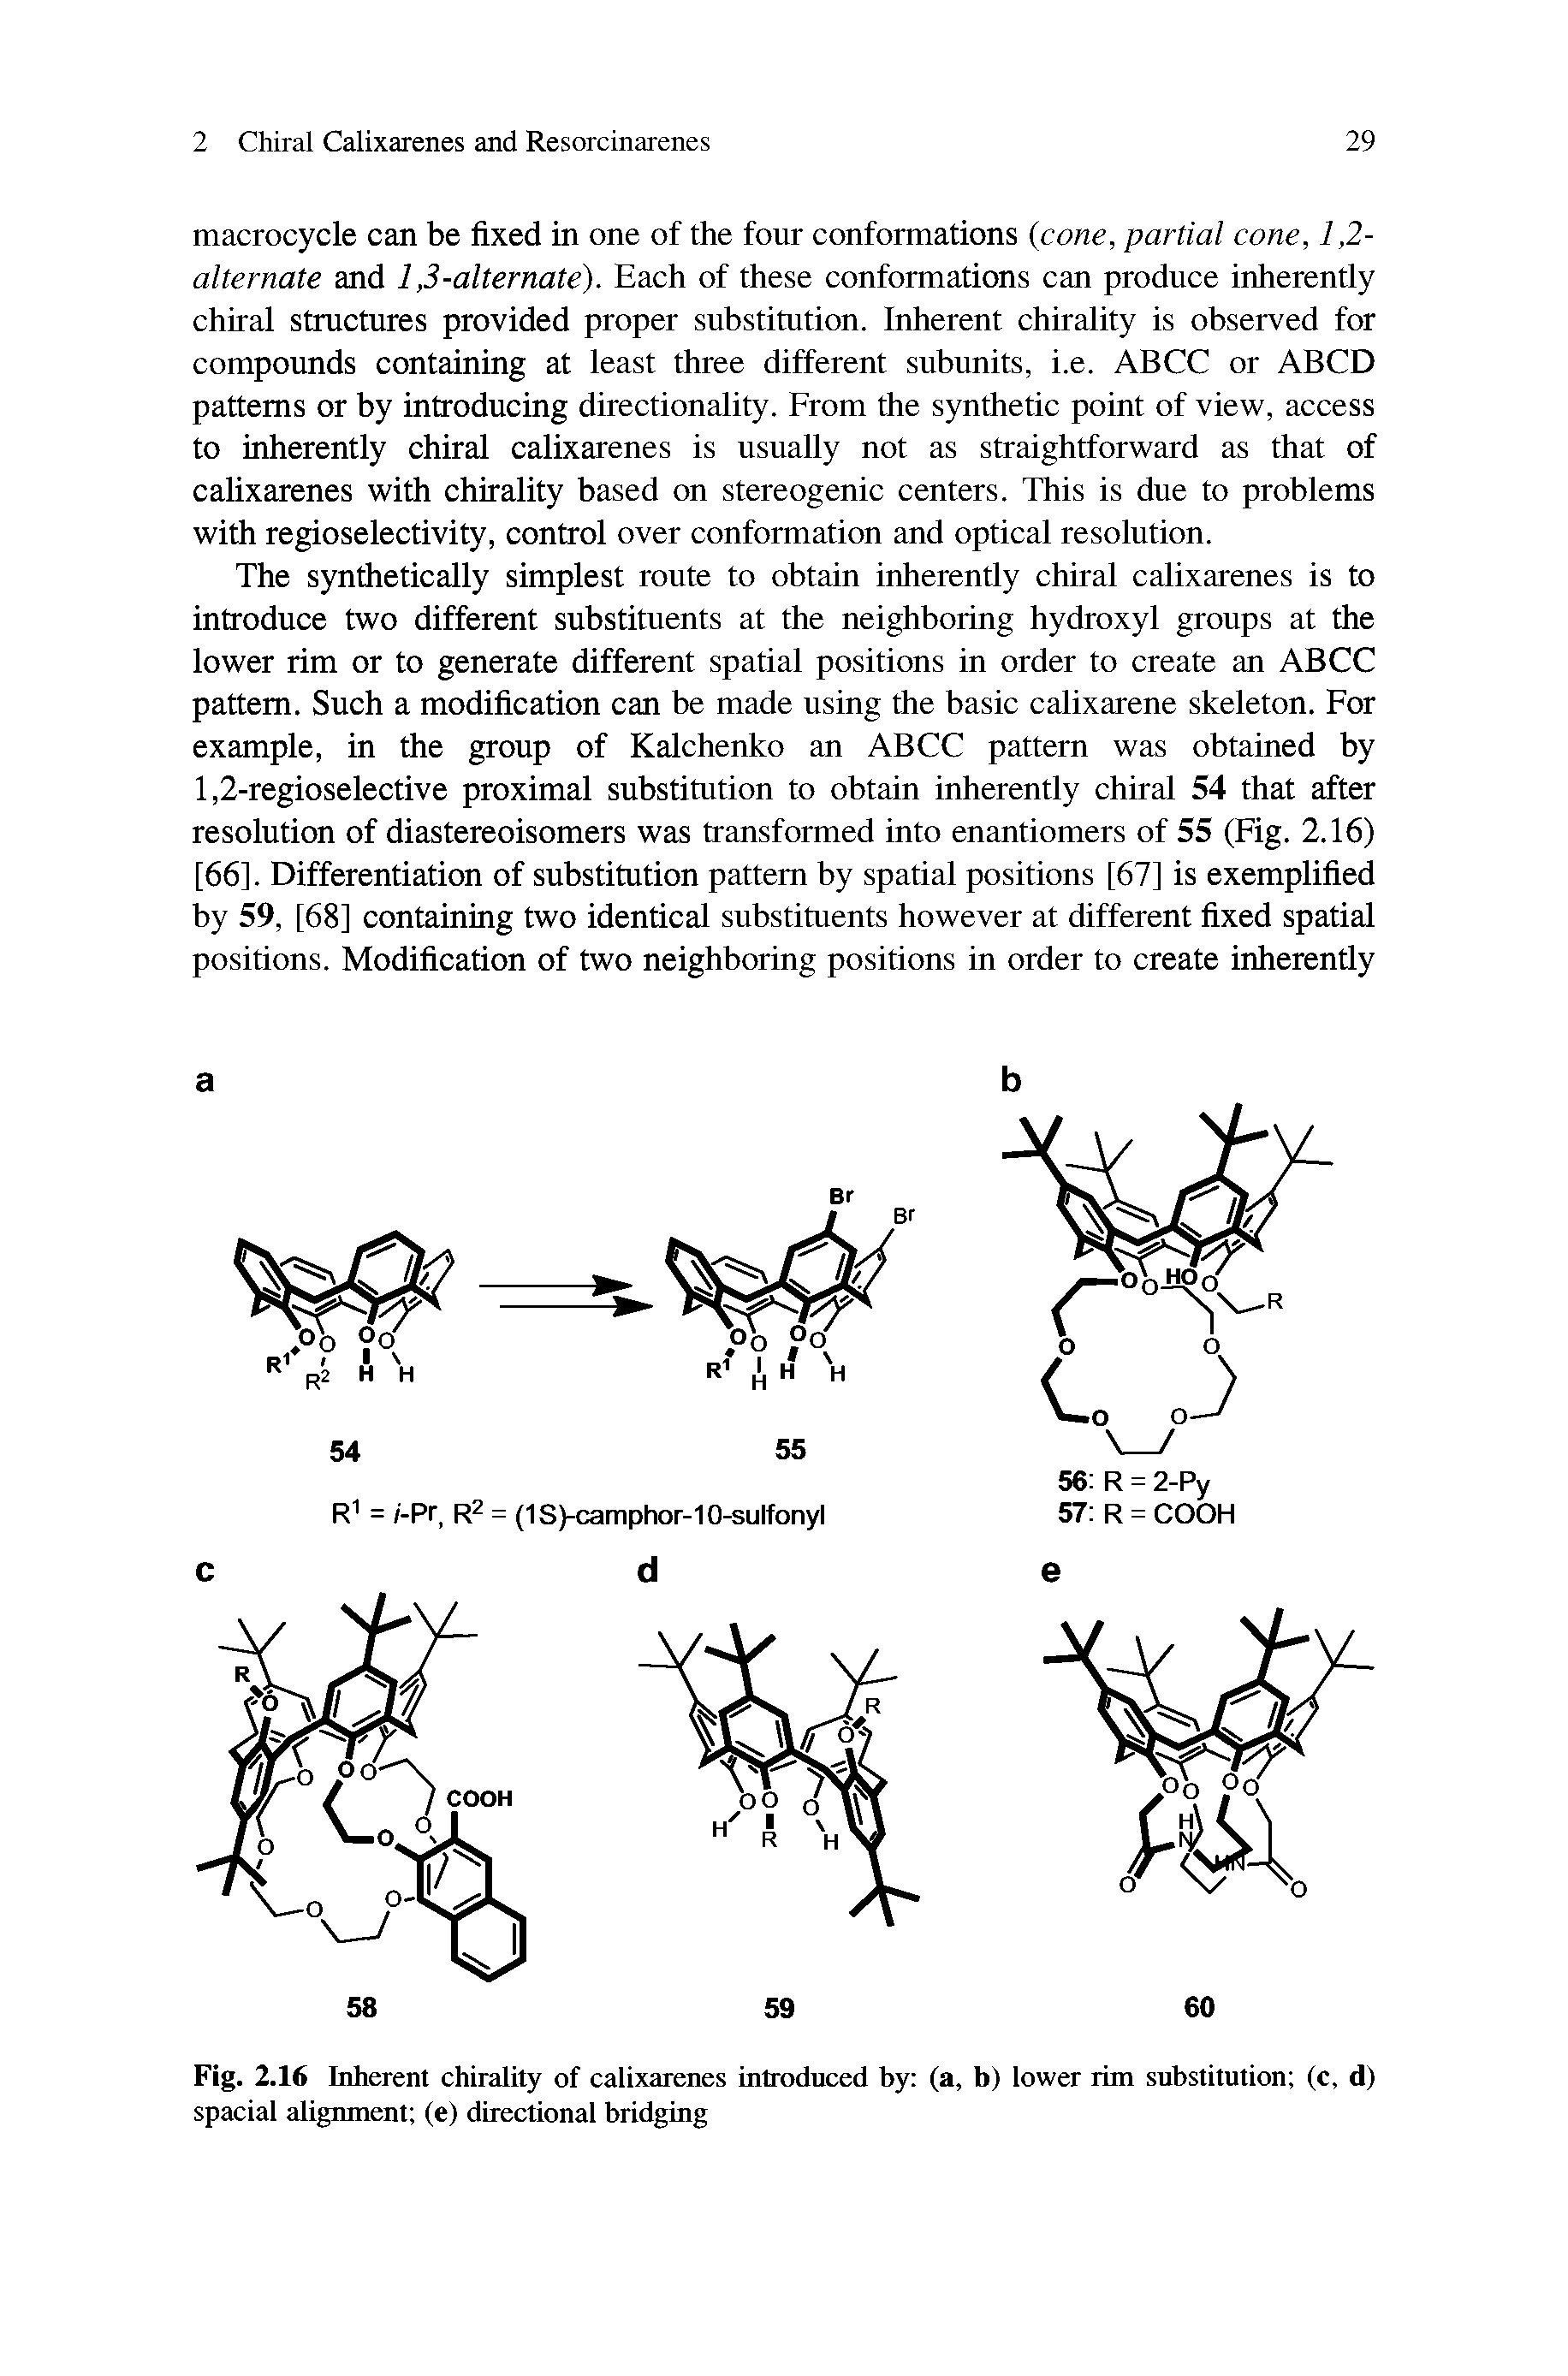 Fig. 2.16 Inherent chirality of calixarenes introduced by (a, b) lower rim substitution (c, d) spacial alignment (e) directional bridging...